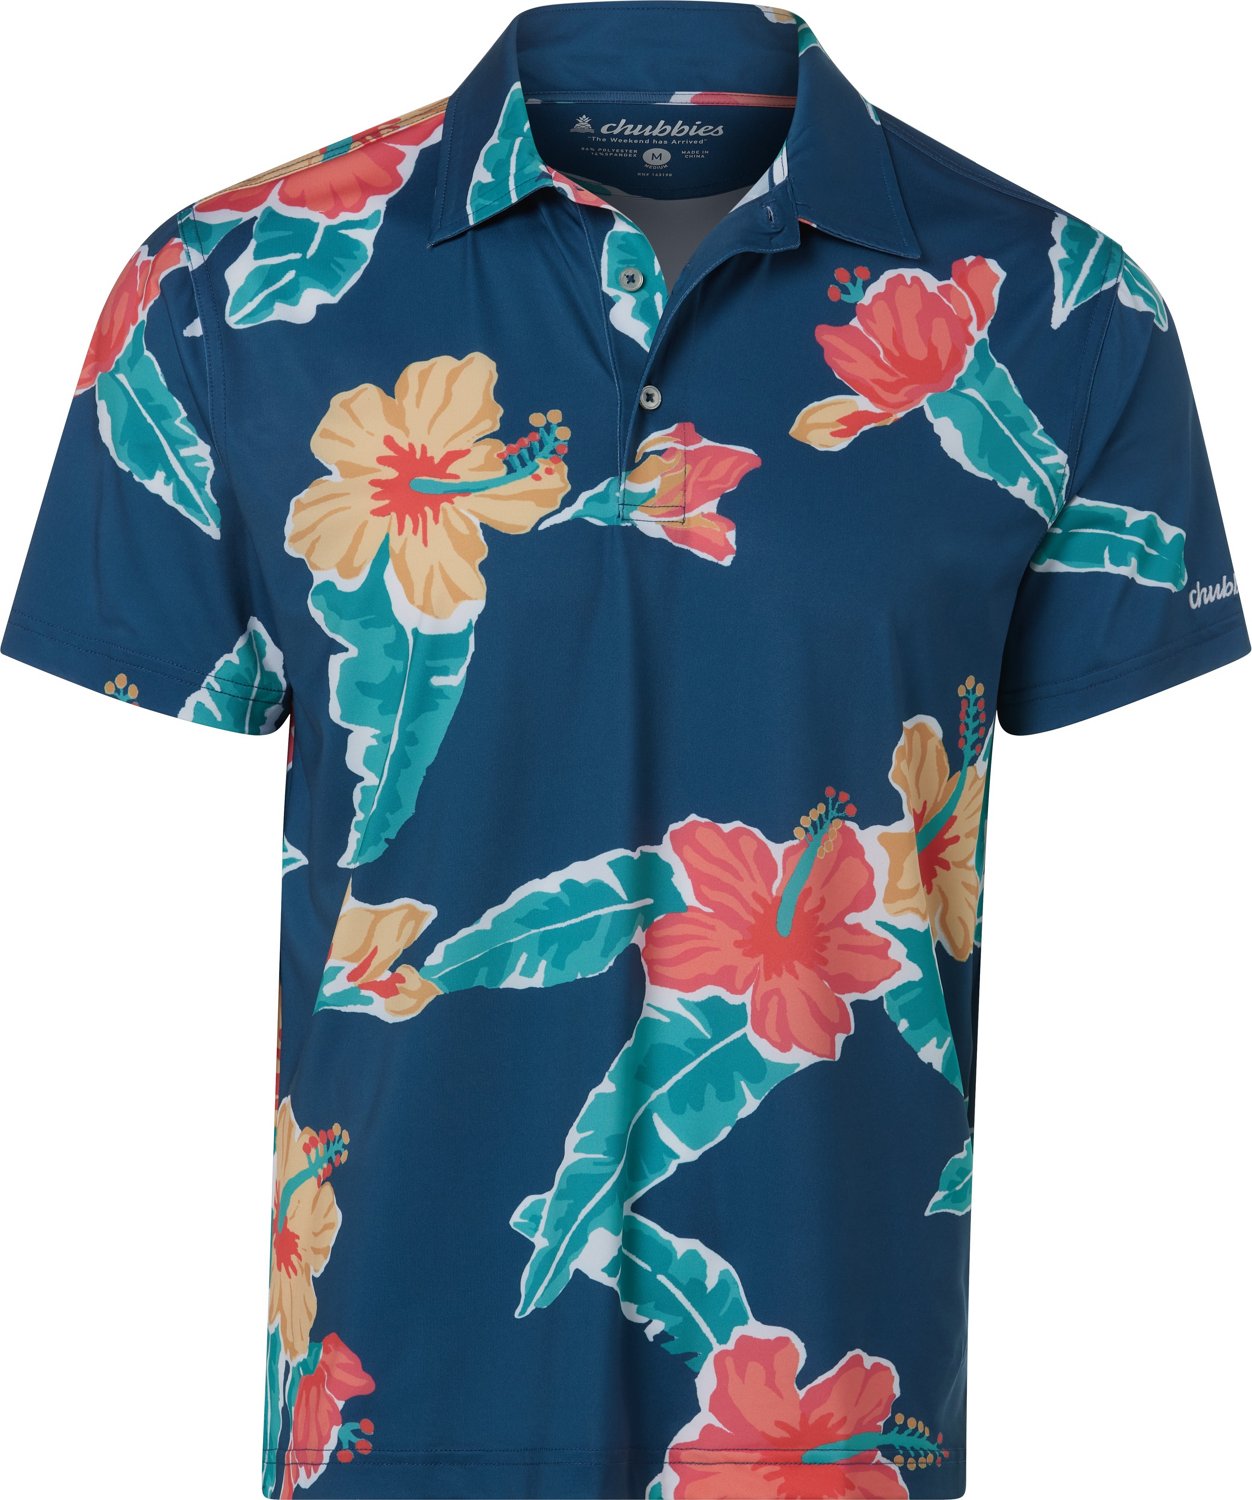 Chubbies Men's Floral Reef Performance Polo Shirt | Academy